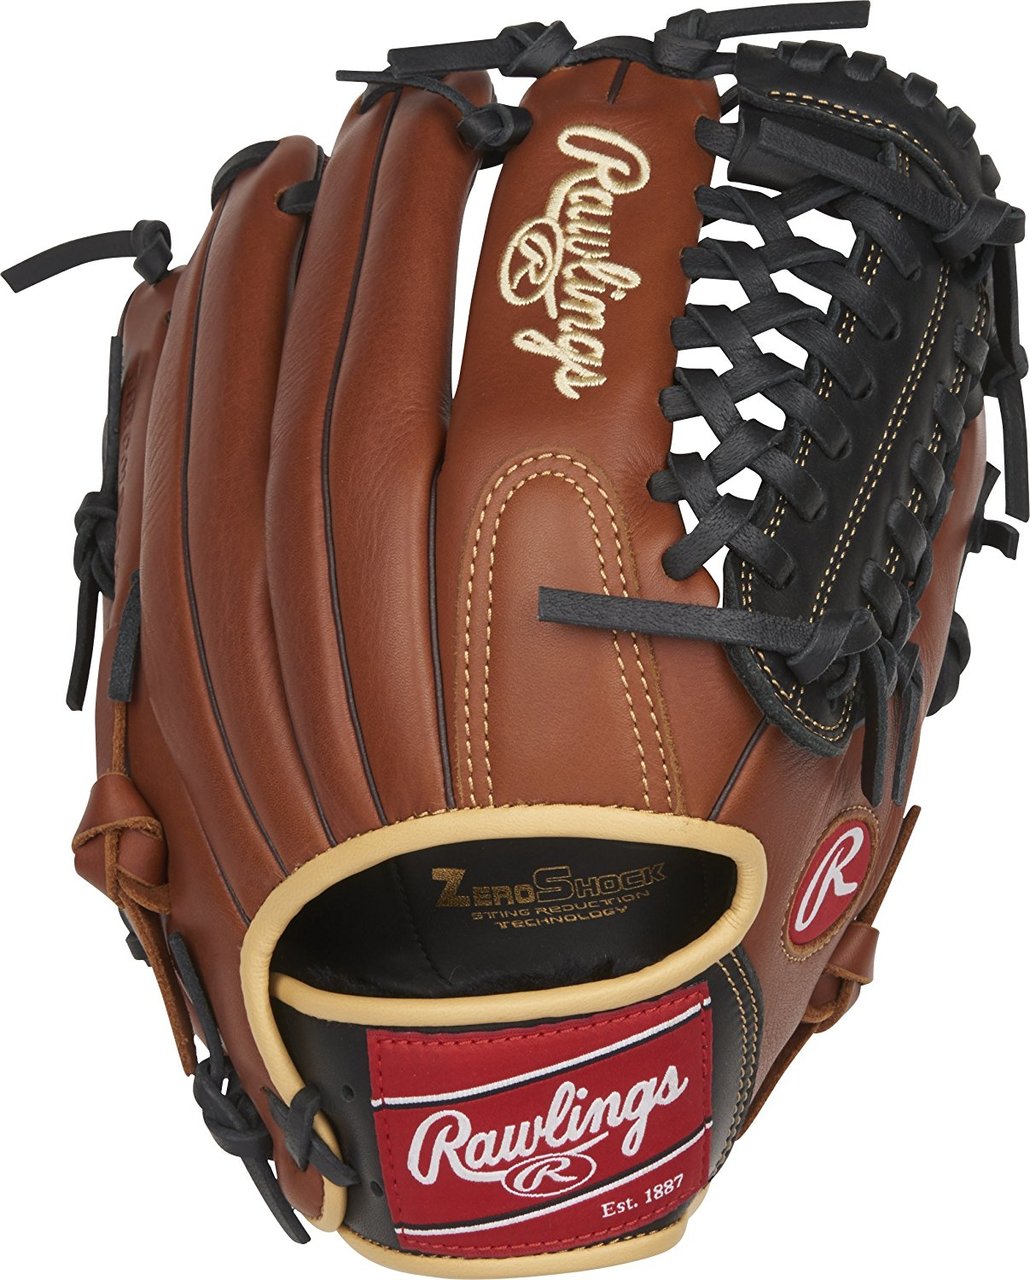 The Sandlot Series gloves feature an oiled pull-up leather that gives the models a unique vintage look and feel with minimal break-in required. The designs are further enhanced with pro-style patterns. Details Age: Adult Brand: Rawlings Map: No Sport: Baseball Type: Baseball Size: 11.75 in Back: Conventional Player Break-In: 10 Fit: Standard Level: Adult Lining: Padded finger back linings Padding: Zero Shock™ palm pads Pattern: Pro Position: Infield Series: Sandlot Series Shell: Full-grain oiled shell leather Type: Baseball